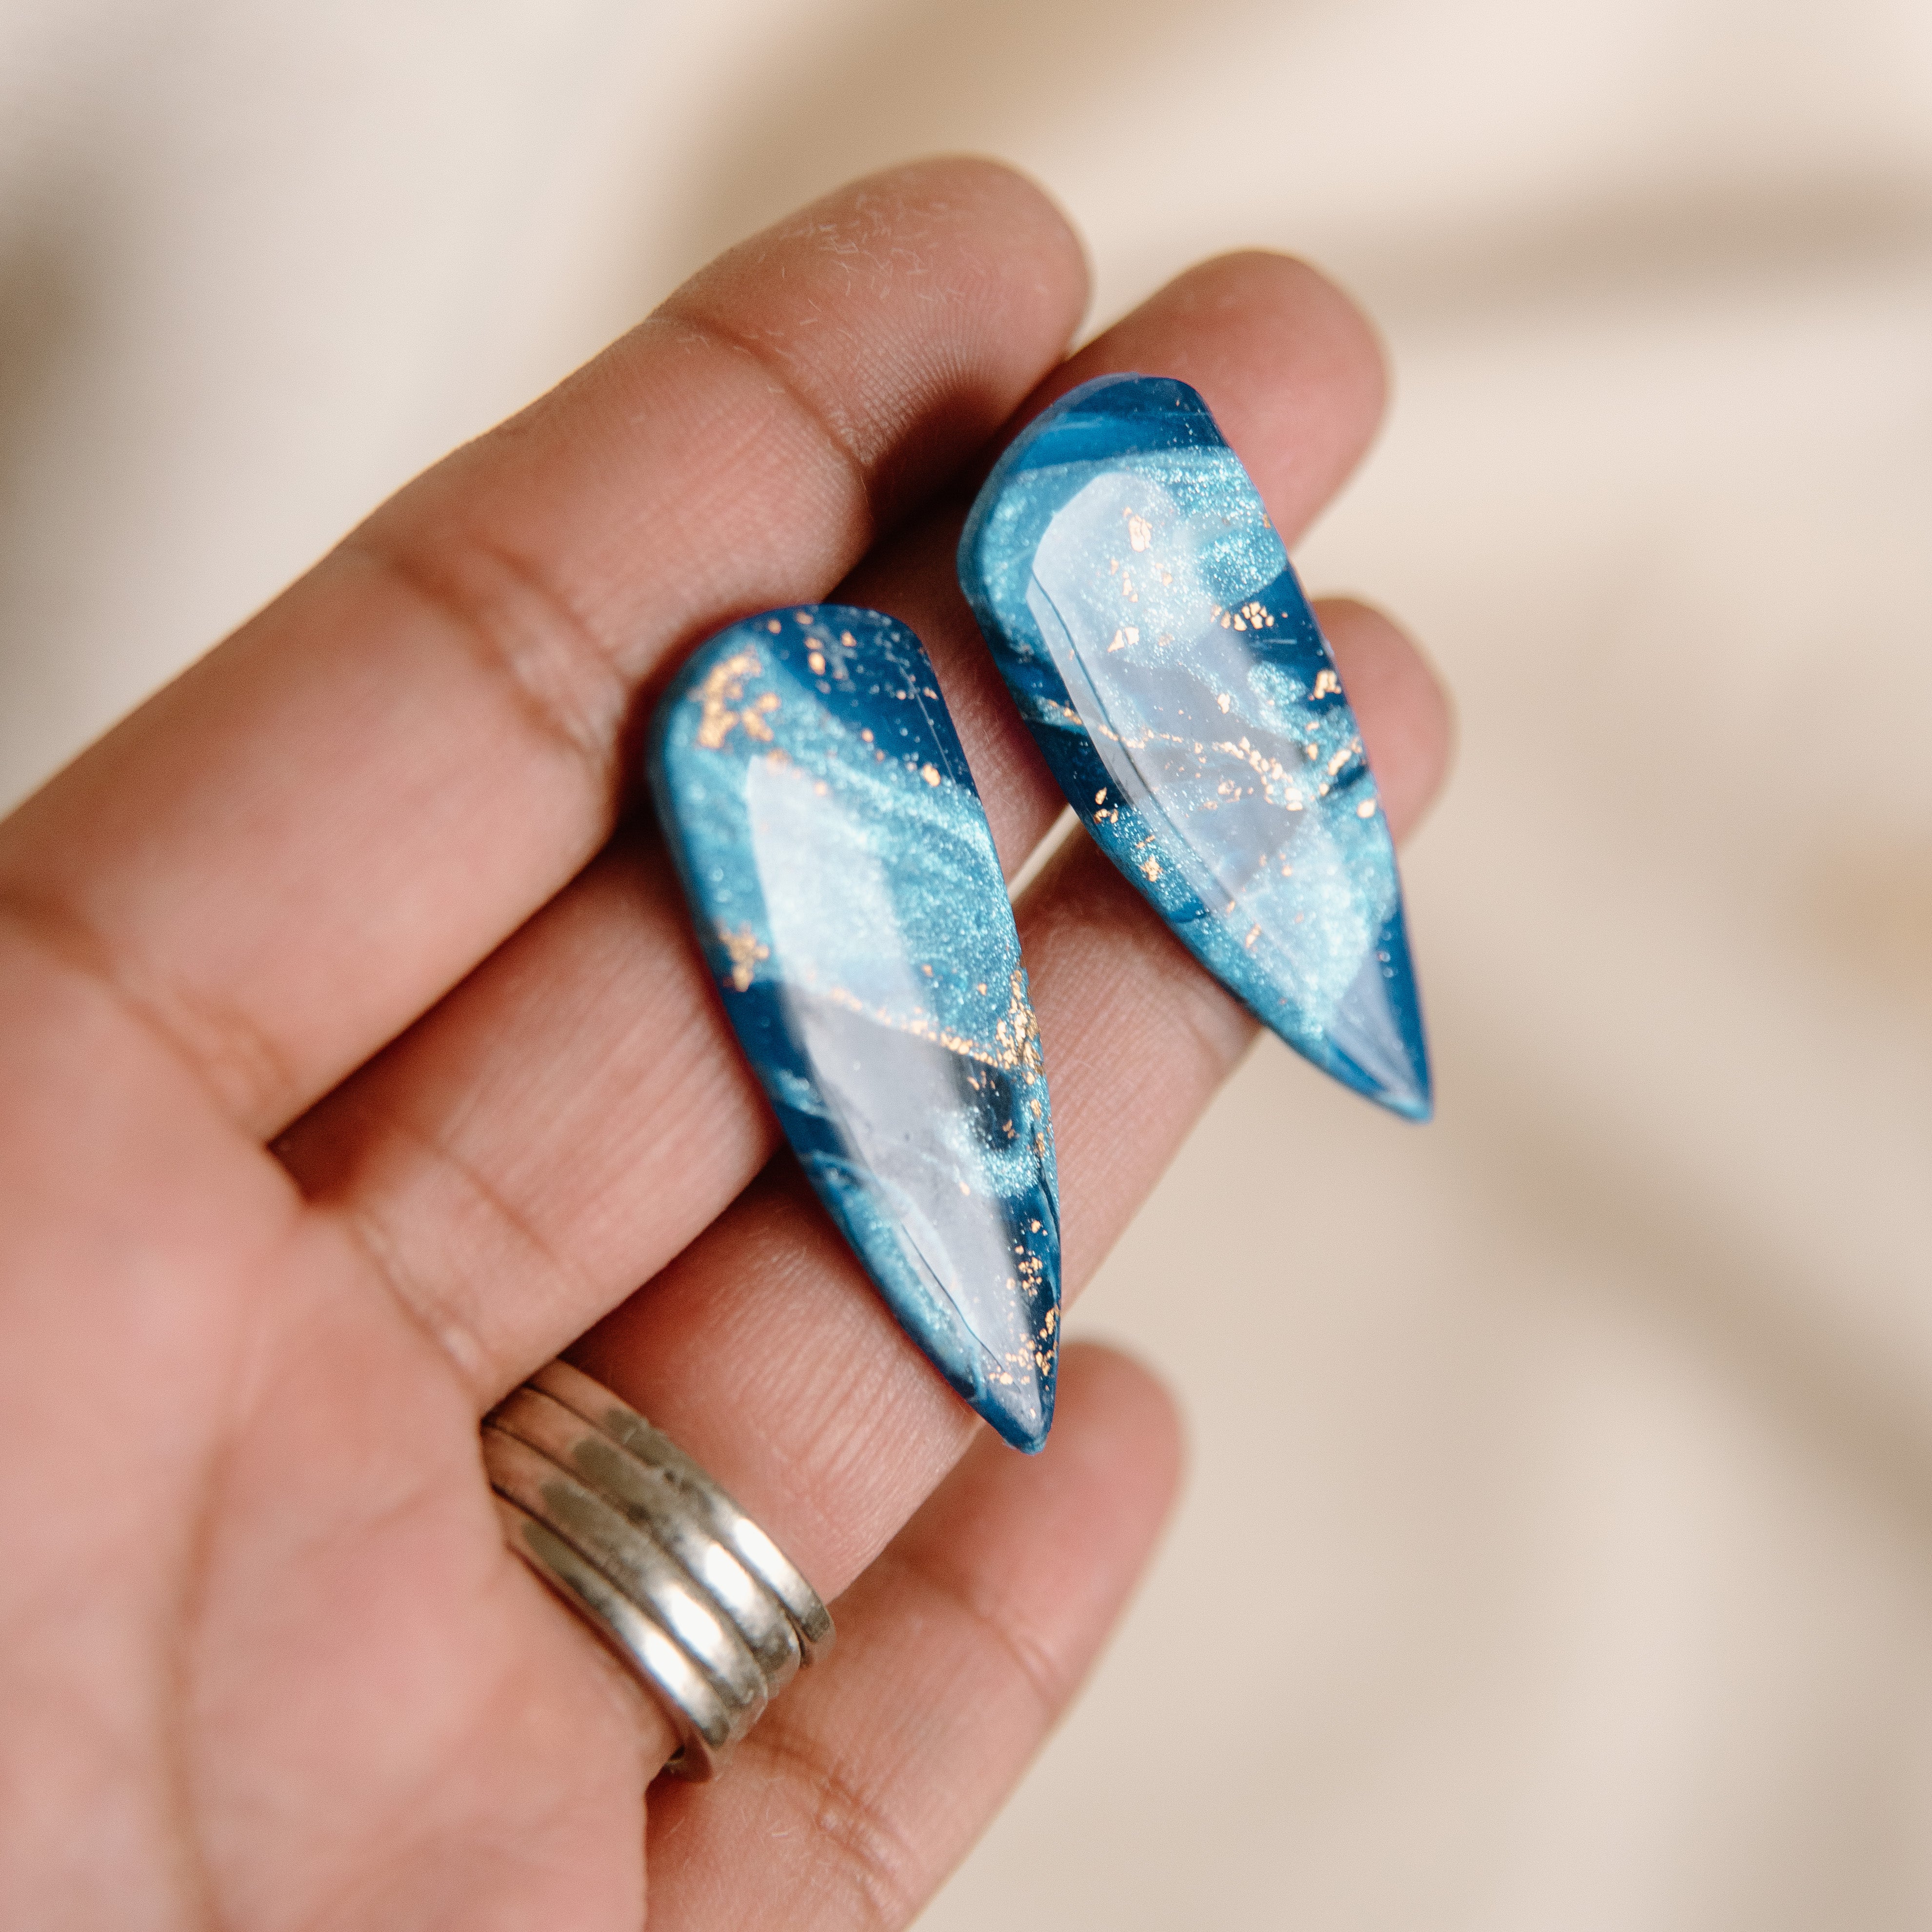 Ocean Inspired Earring Collection